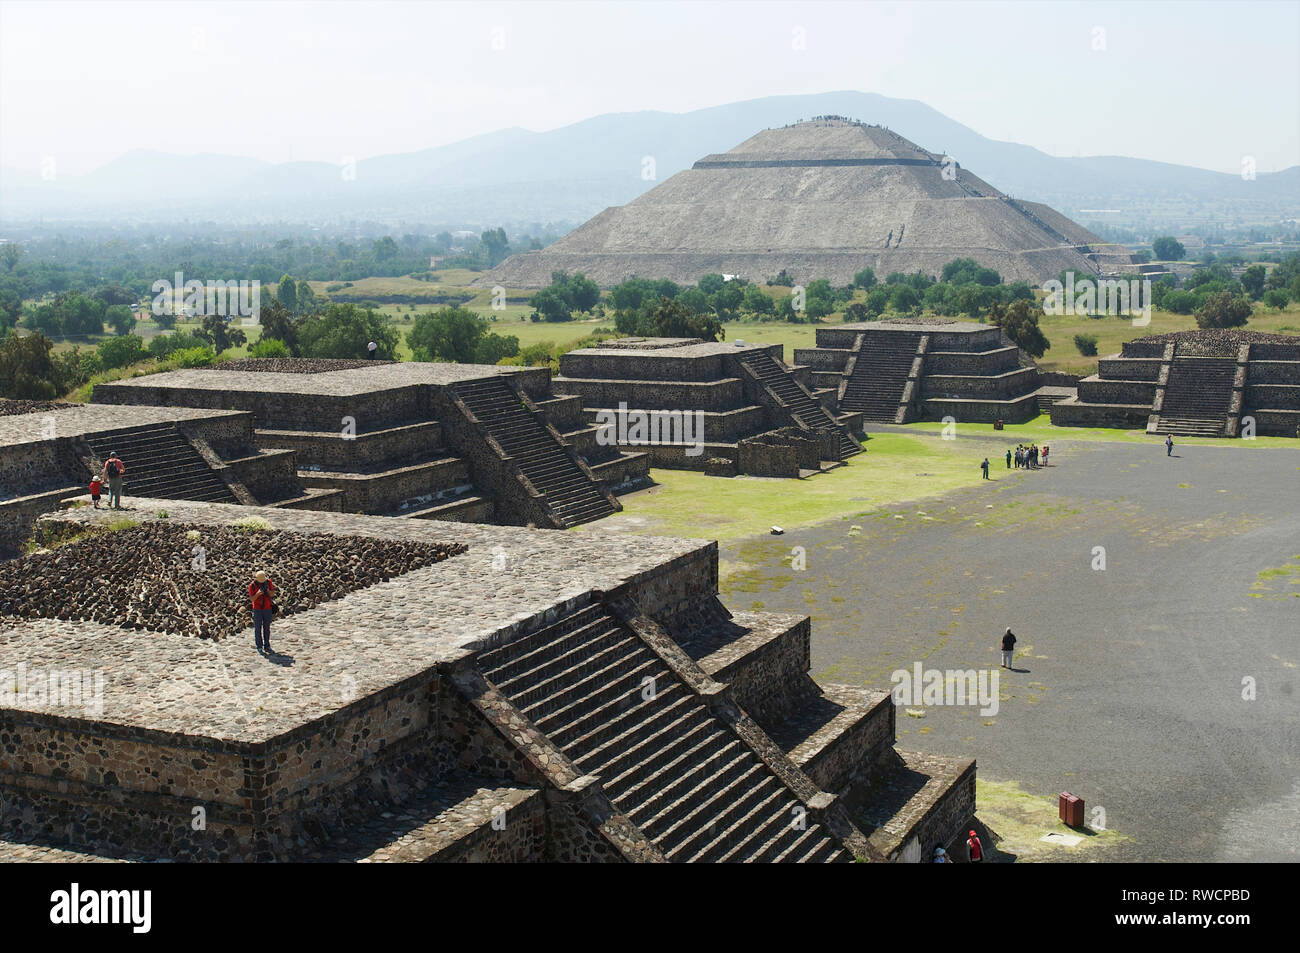 View of tourists on Avenue of the Dead and Pyramid of the Sun and at Teotihuacan, Mexico Stock Photo